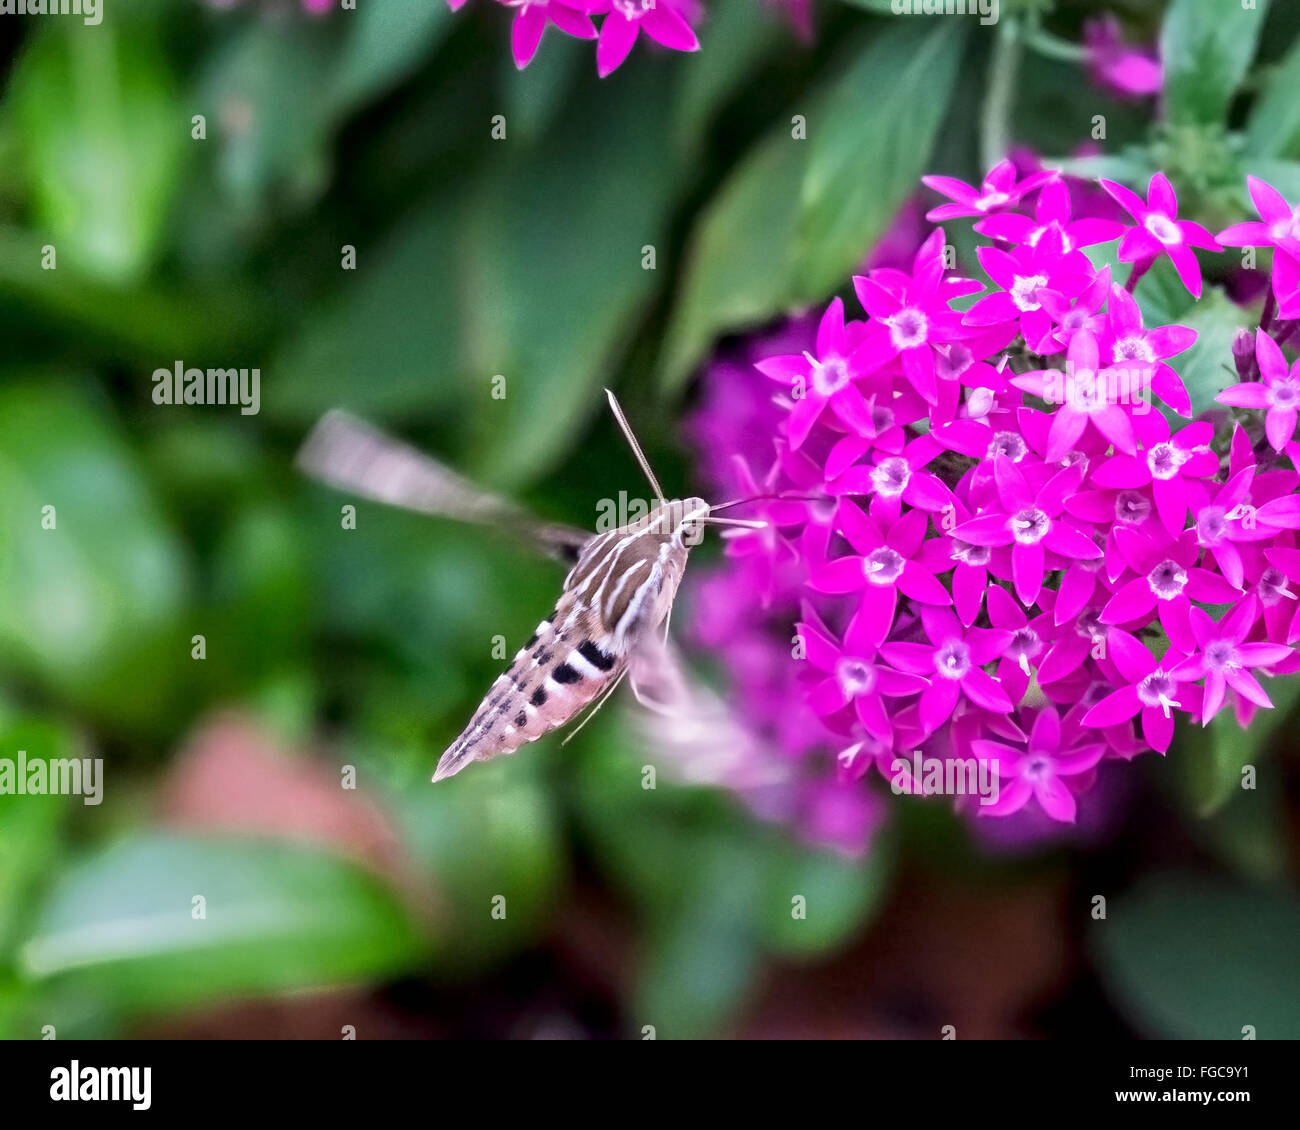 A White-lined sphinx moth,Hyles lineata, nectars on Pentas lanceolata flowers in late evening in Oklahoma, USA. Stock Photo